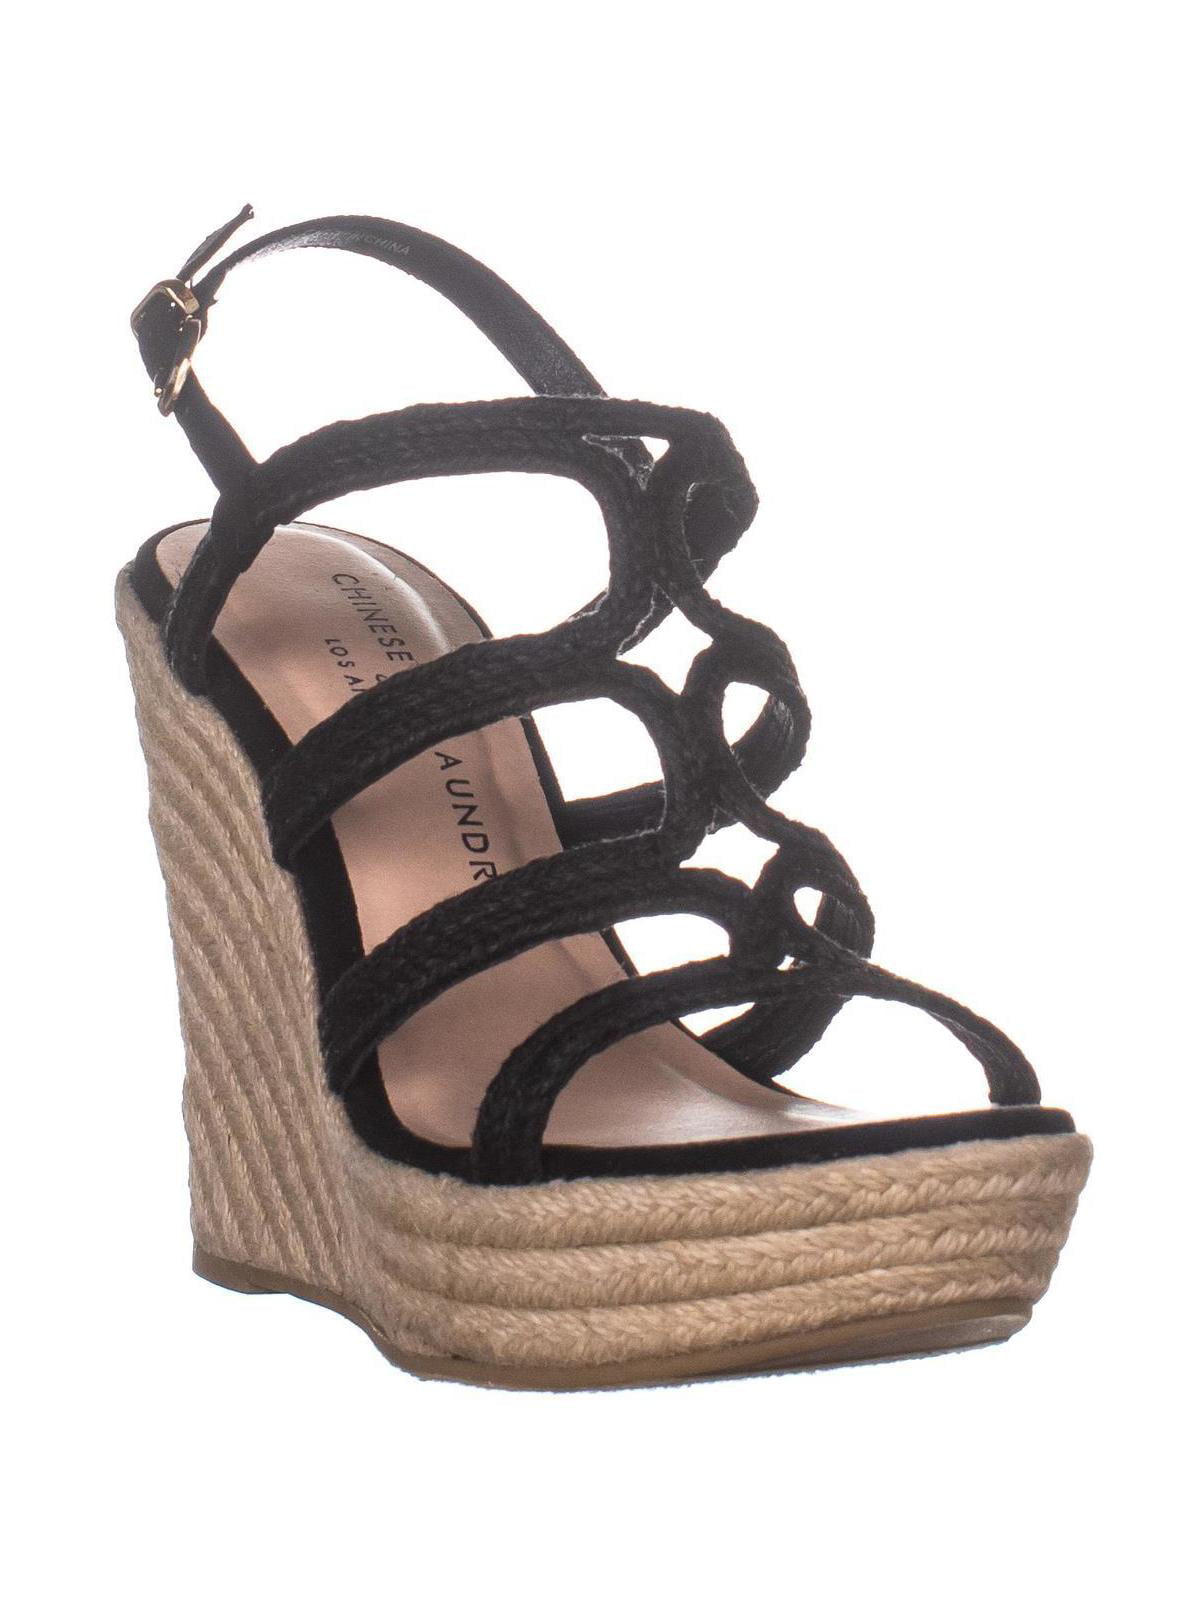 Womens Chinese Laundry Milla Espadrille Wedge Sandals, Black, 7.5 US ...